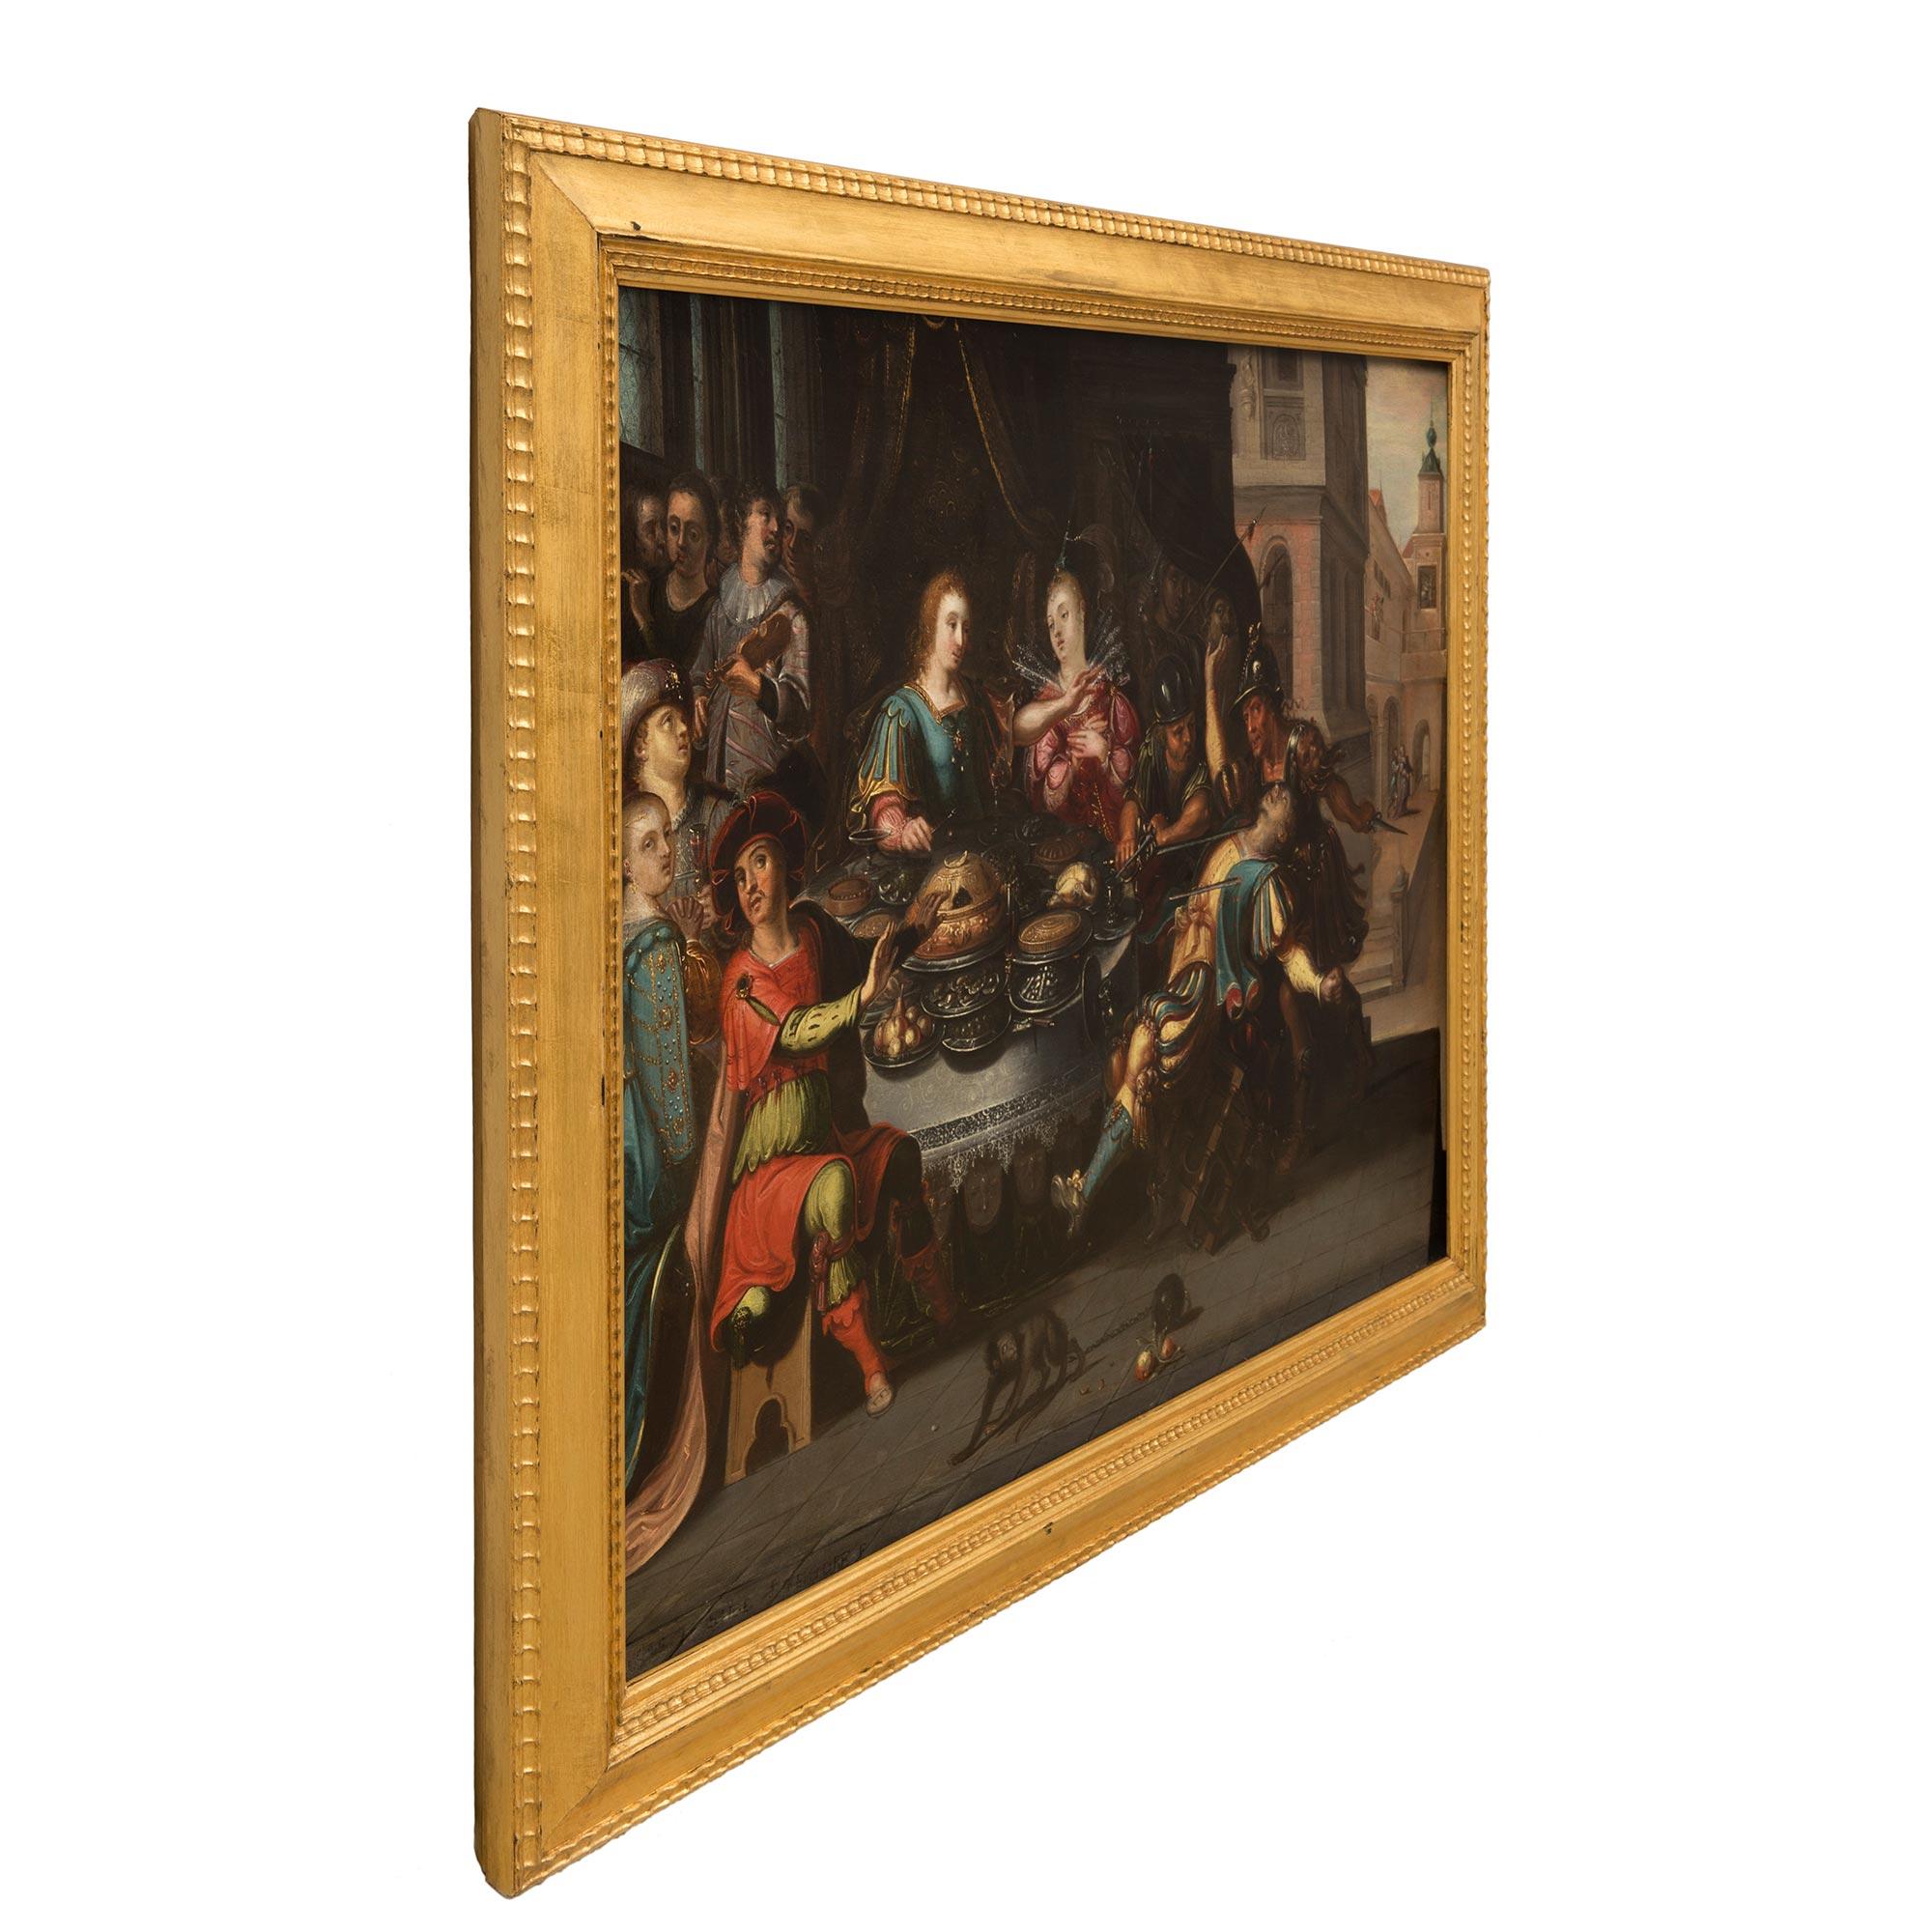 A sensational Dutch 17th century Oil on Wood painting in the manner of Frans Francken. The painting depicts the scene of a feast with a young male and female enjoying a feast while musicians are playing music in the background. To the left of the